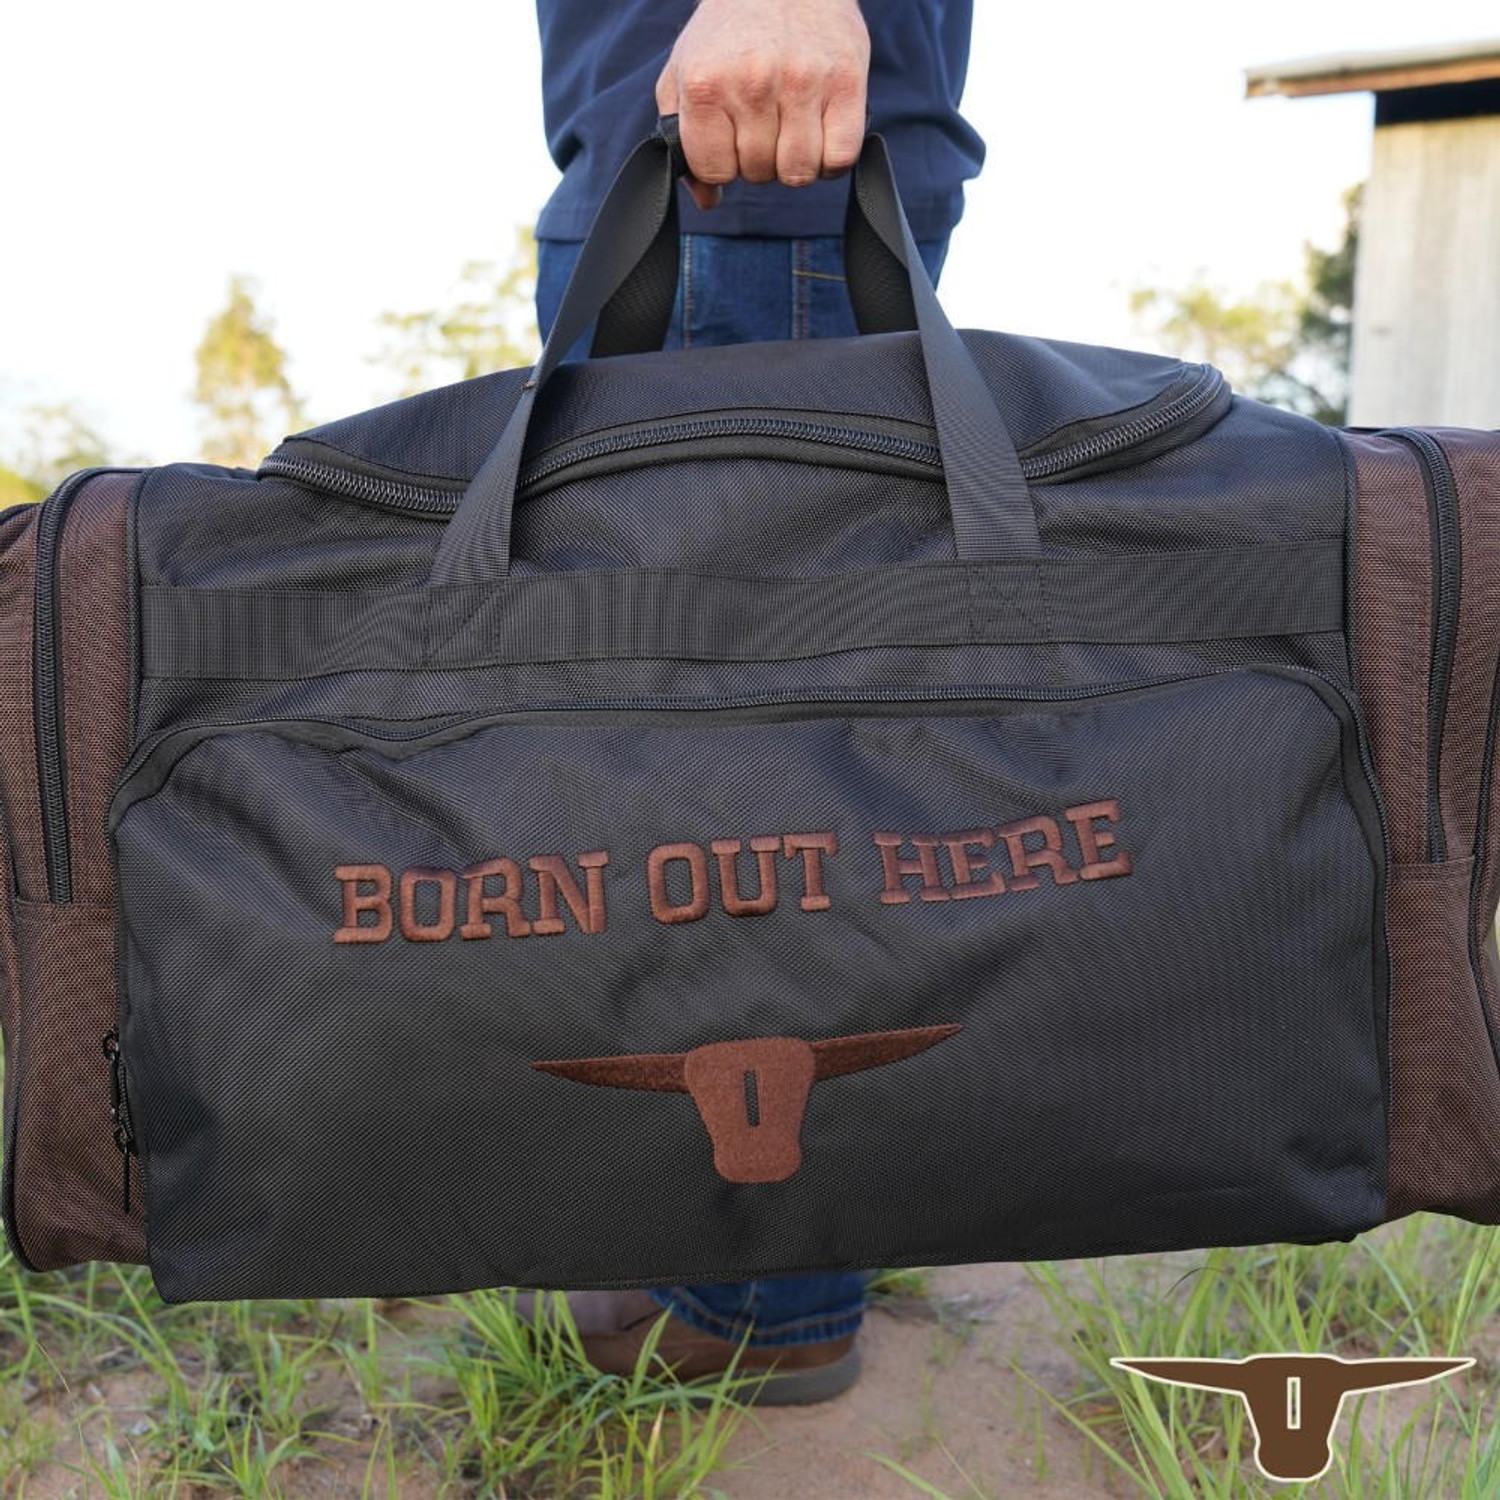 Copperhead Born Out Here Outback Livin Gear Bag in BLACK/CHOCOLATE 